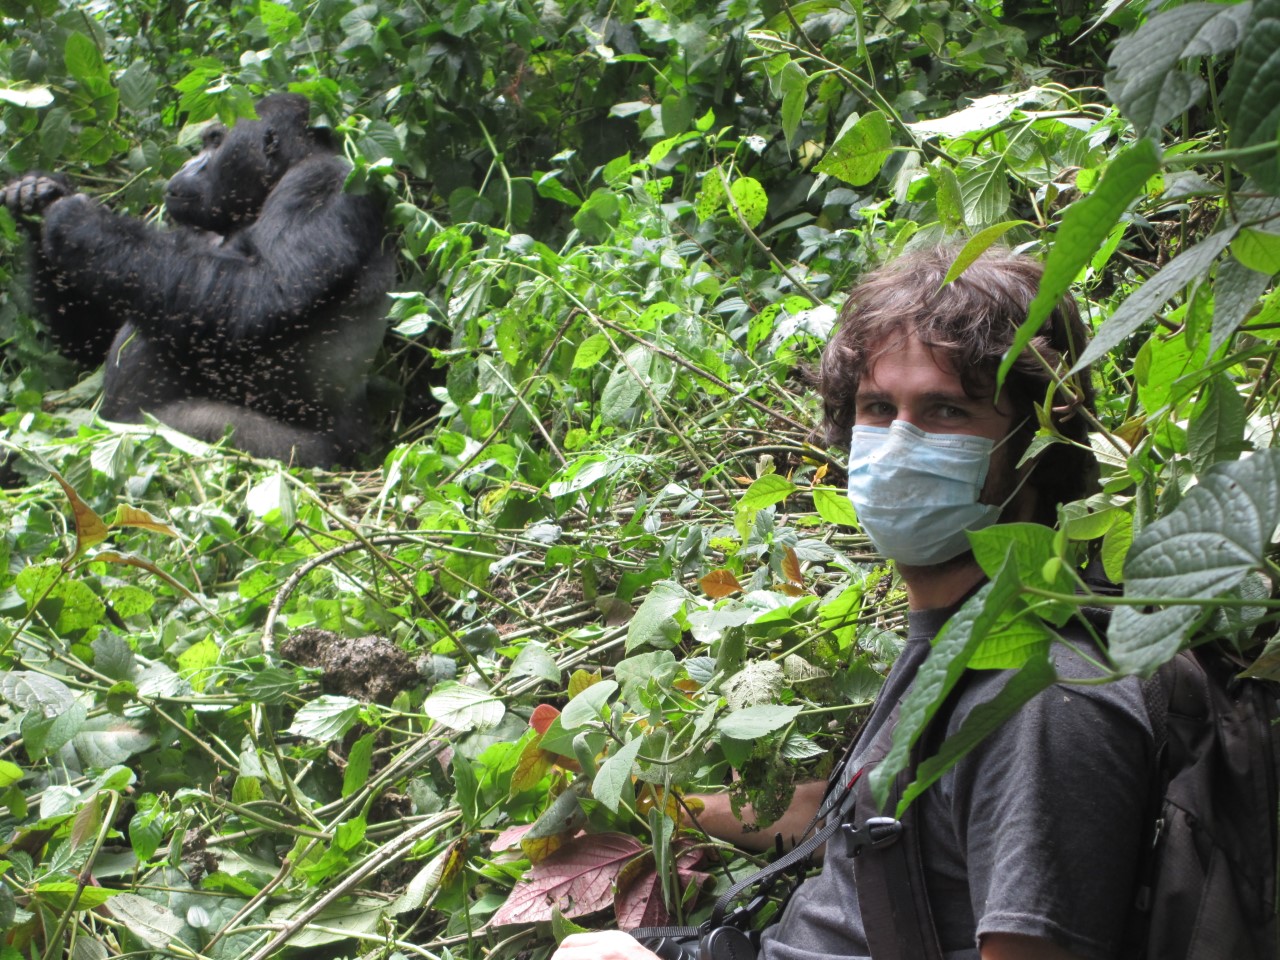 UC Davis anthropologist wearing a face mask and observing gorilla in the forest.